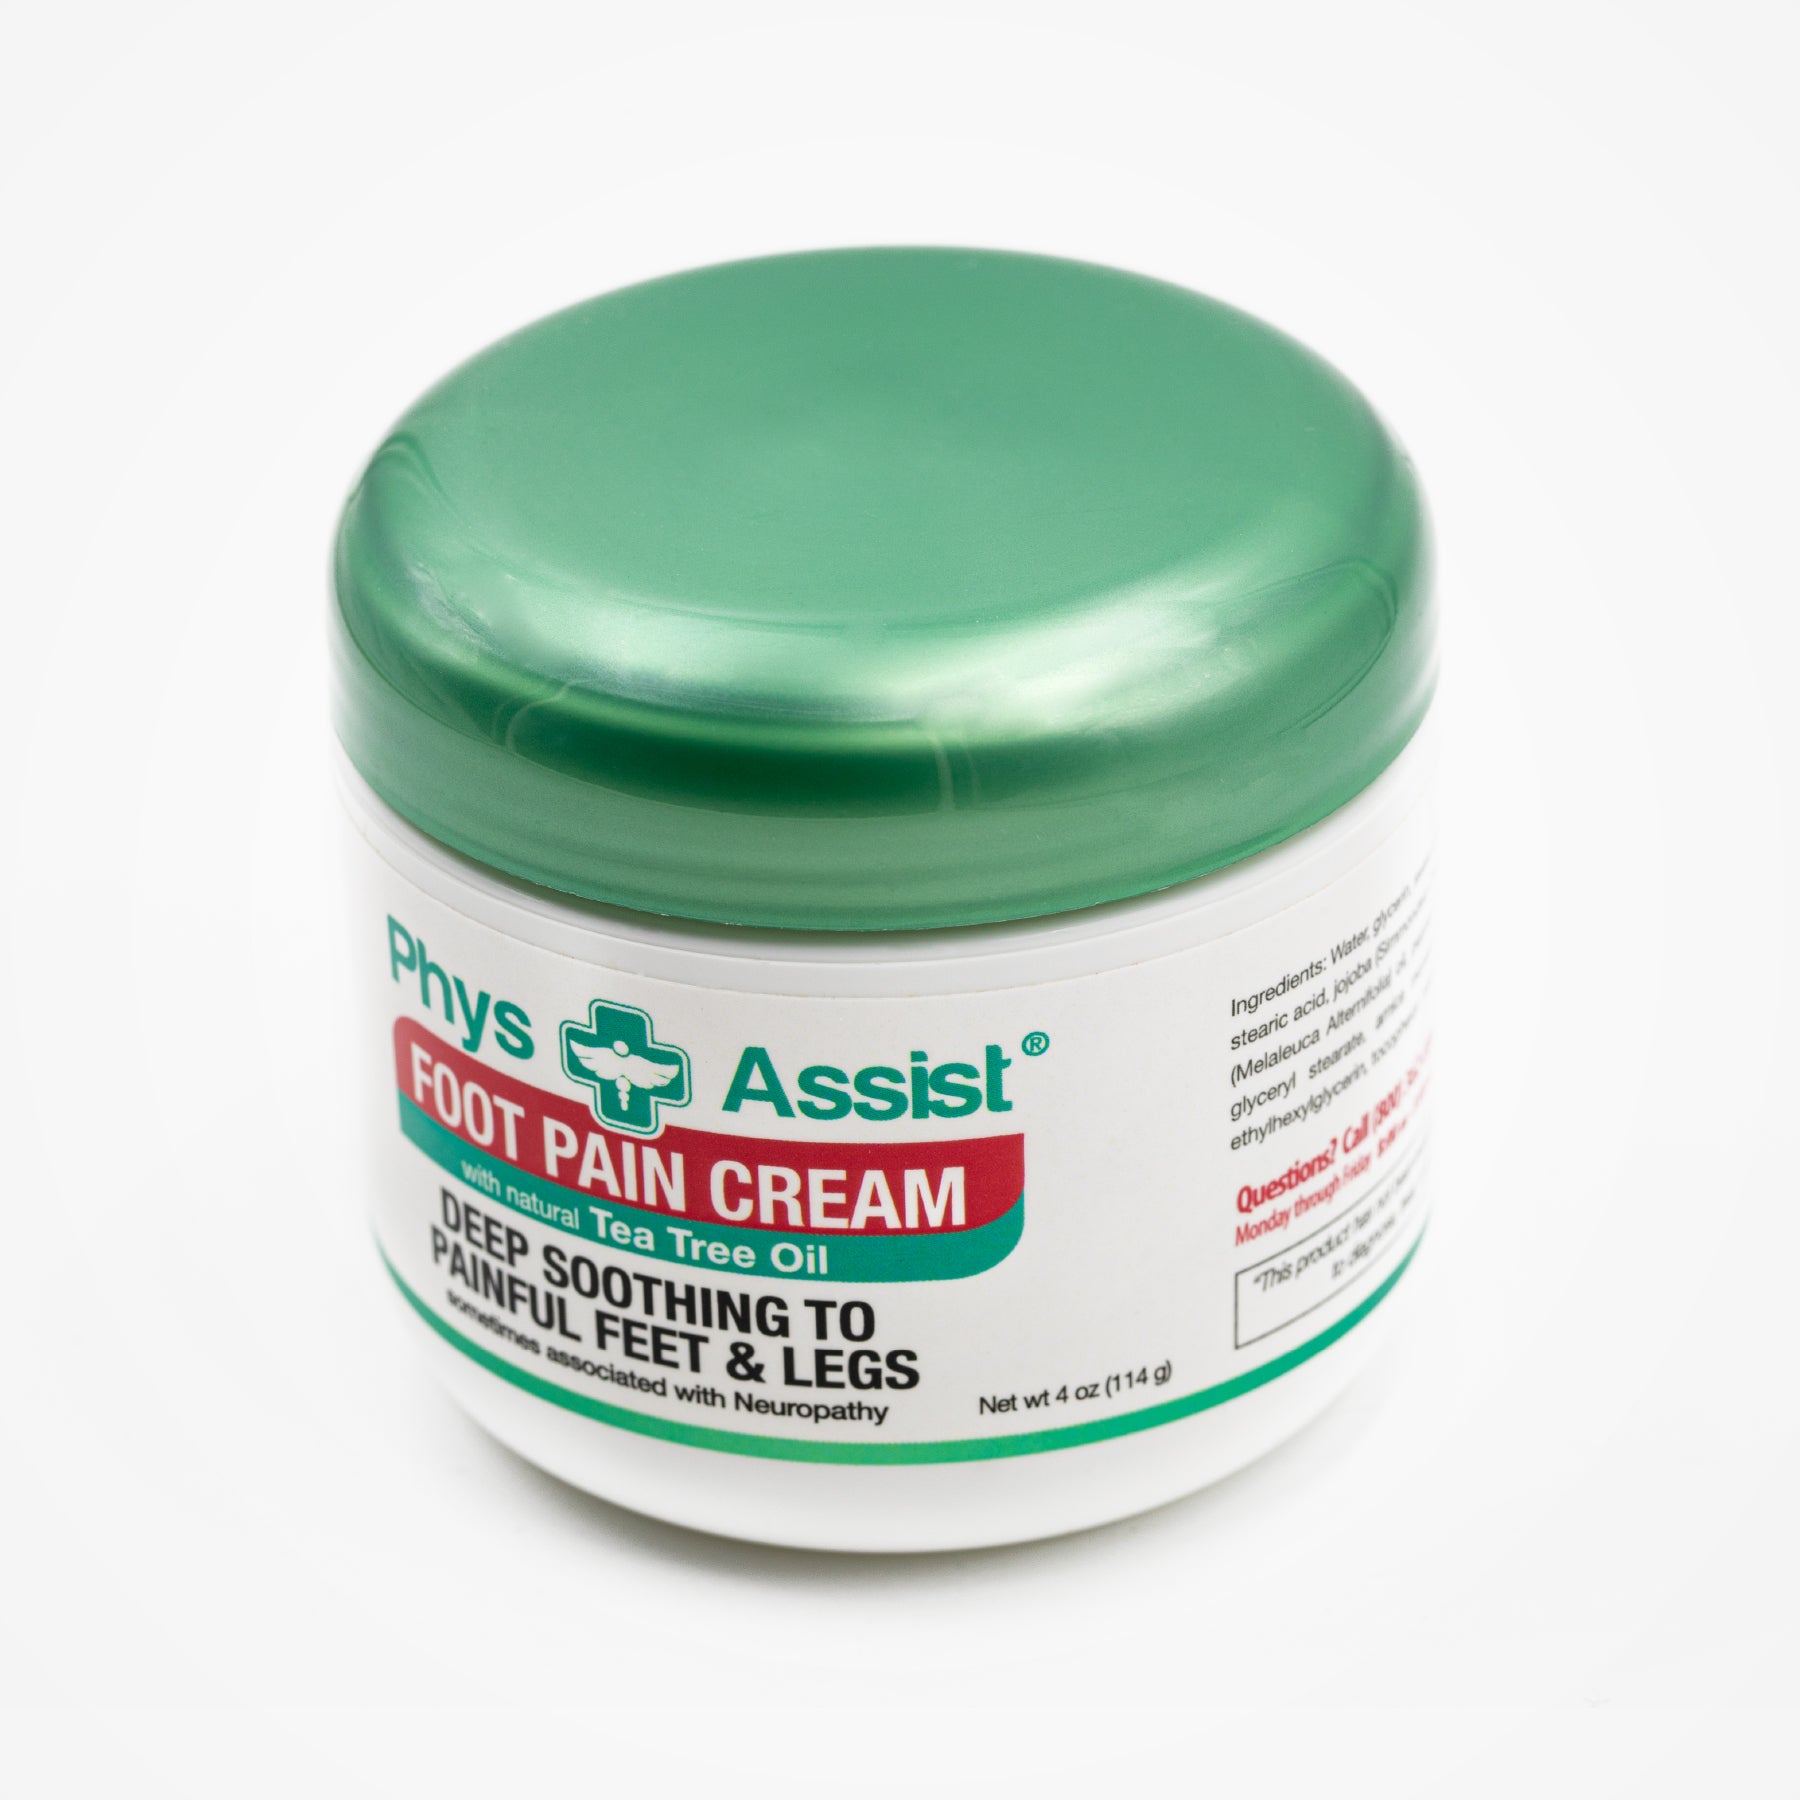 Botanical Muscle Relaxer Cream